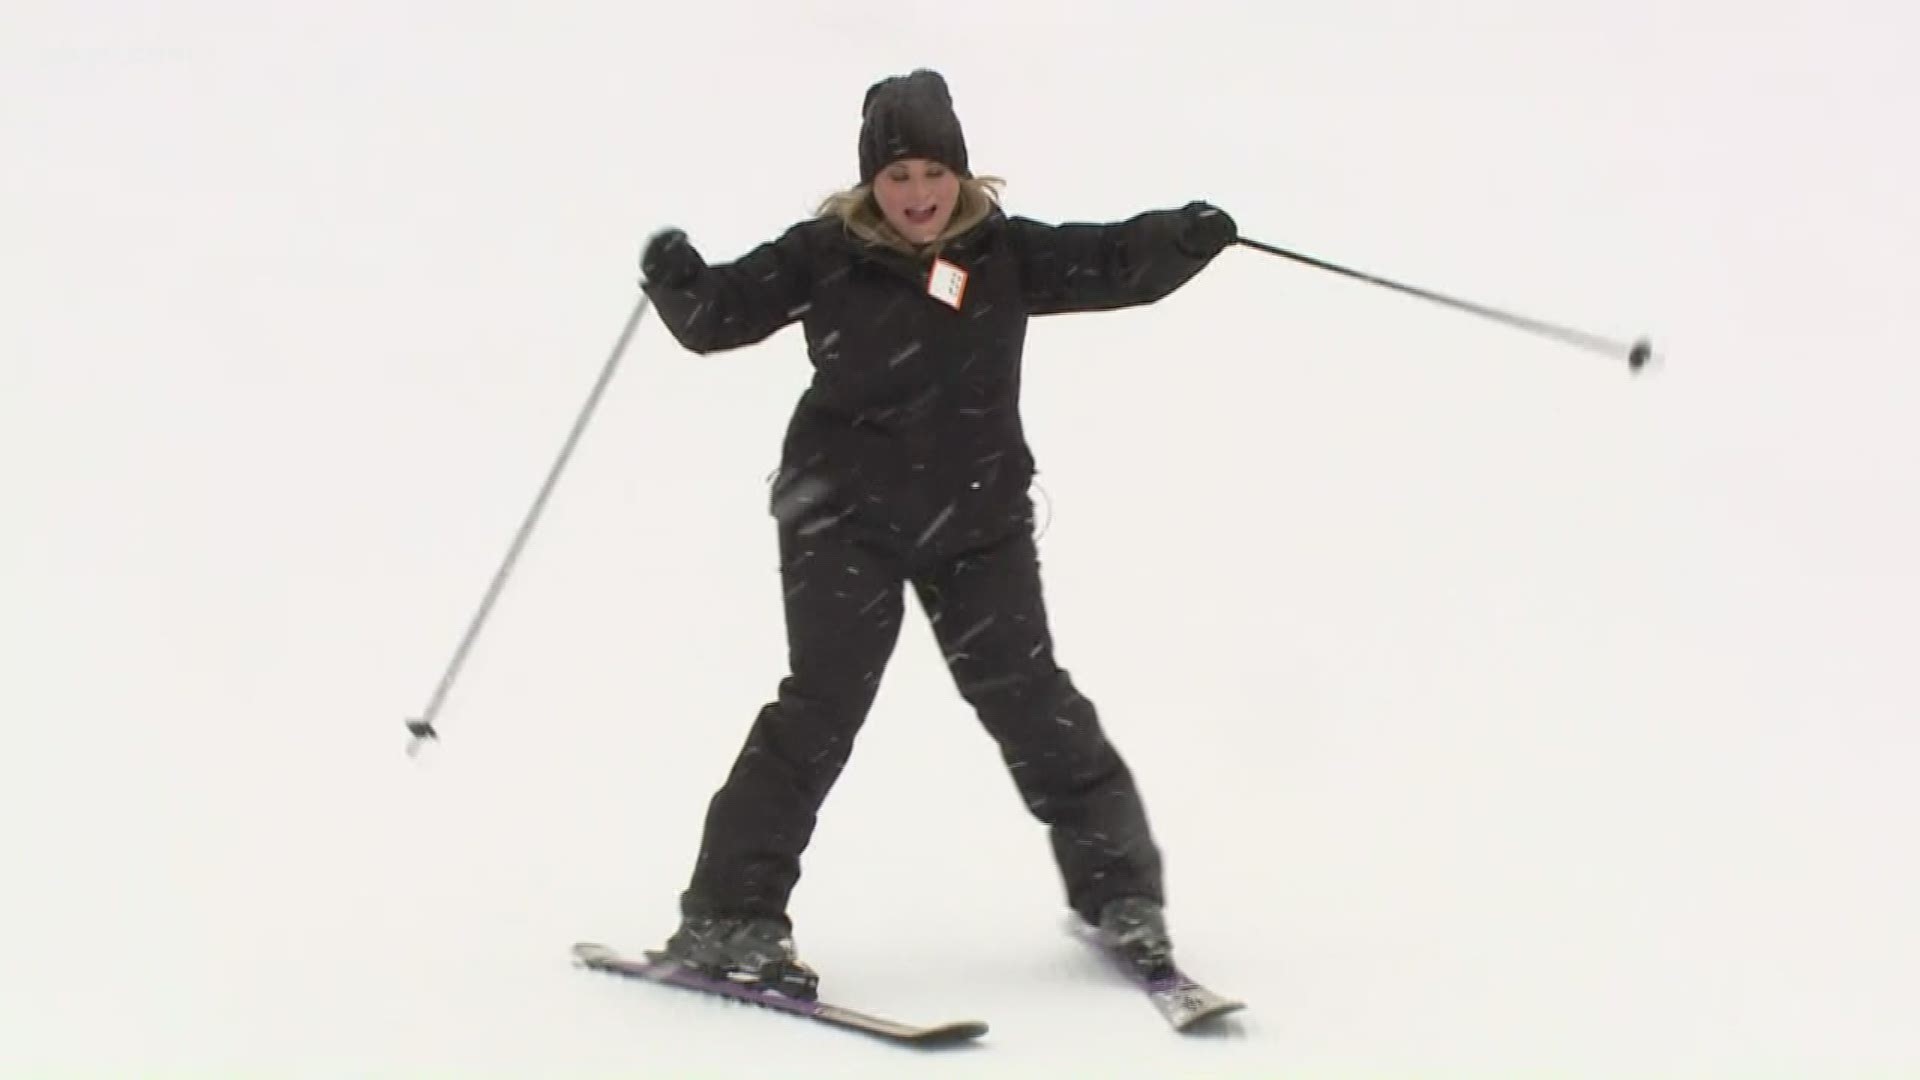 Jan. 19, 2020: The snow is perfect! 3News' Lindsay Buckingham took on the slopes at Boston Mills/Brandywine this morning. So much fun!